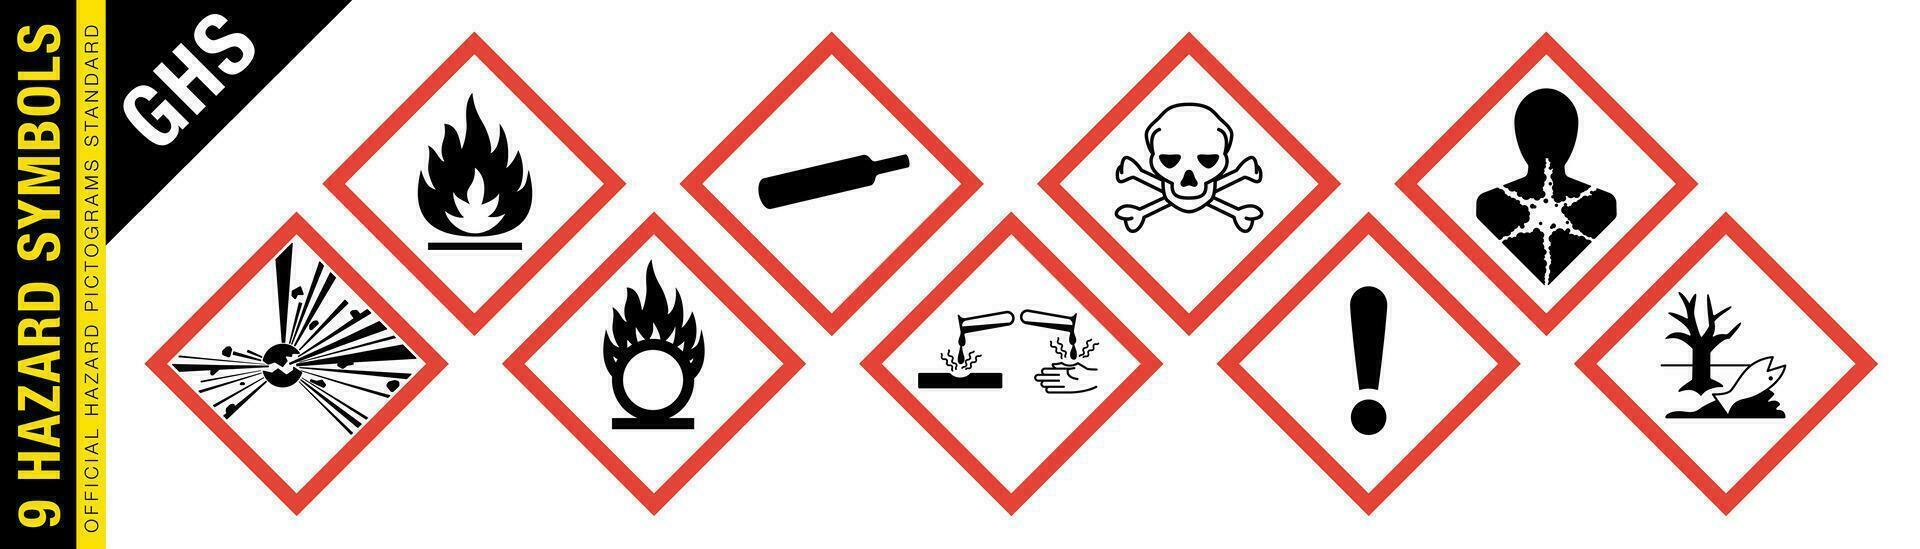 Full set of 9 isolated hazardous material signs. Globally Harmonized System Warning Signs GHS. Hazmat isolated placards. Official Hazard pictograms standard. vector